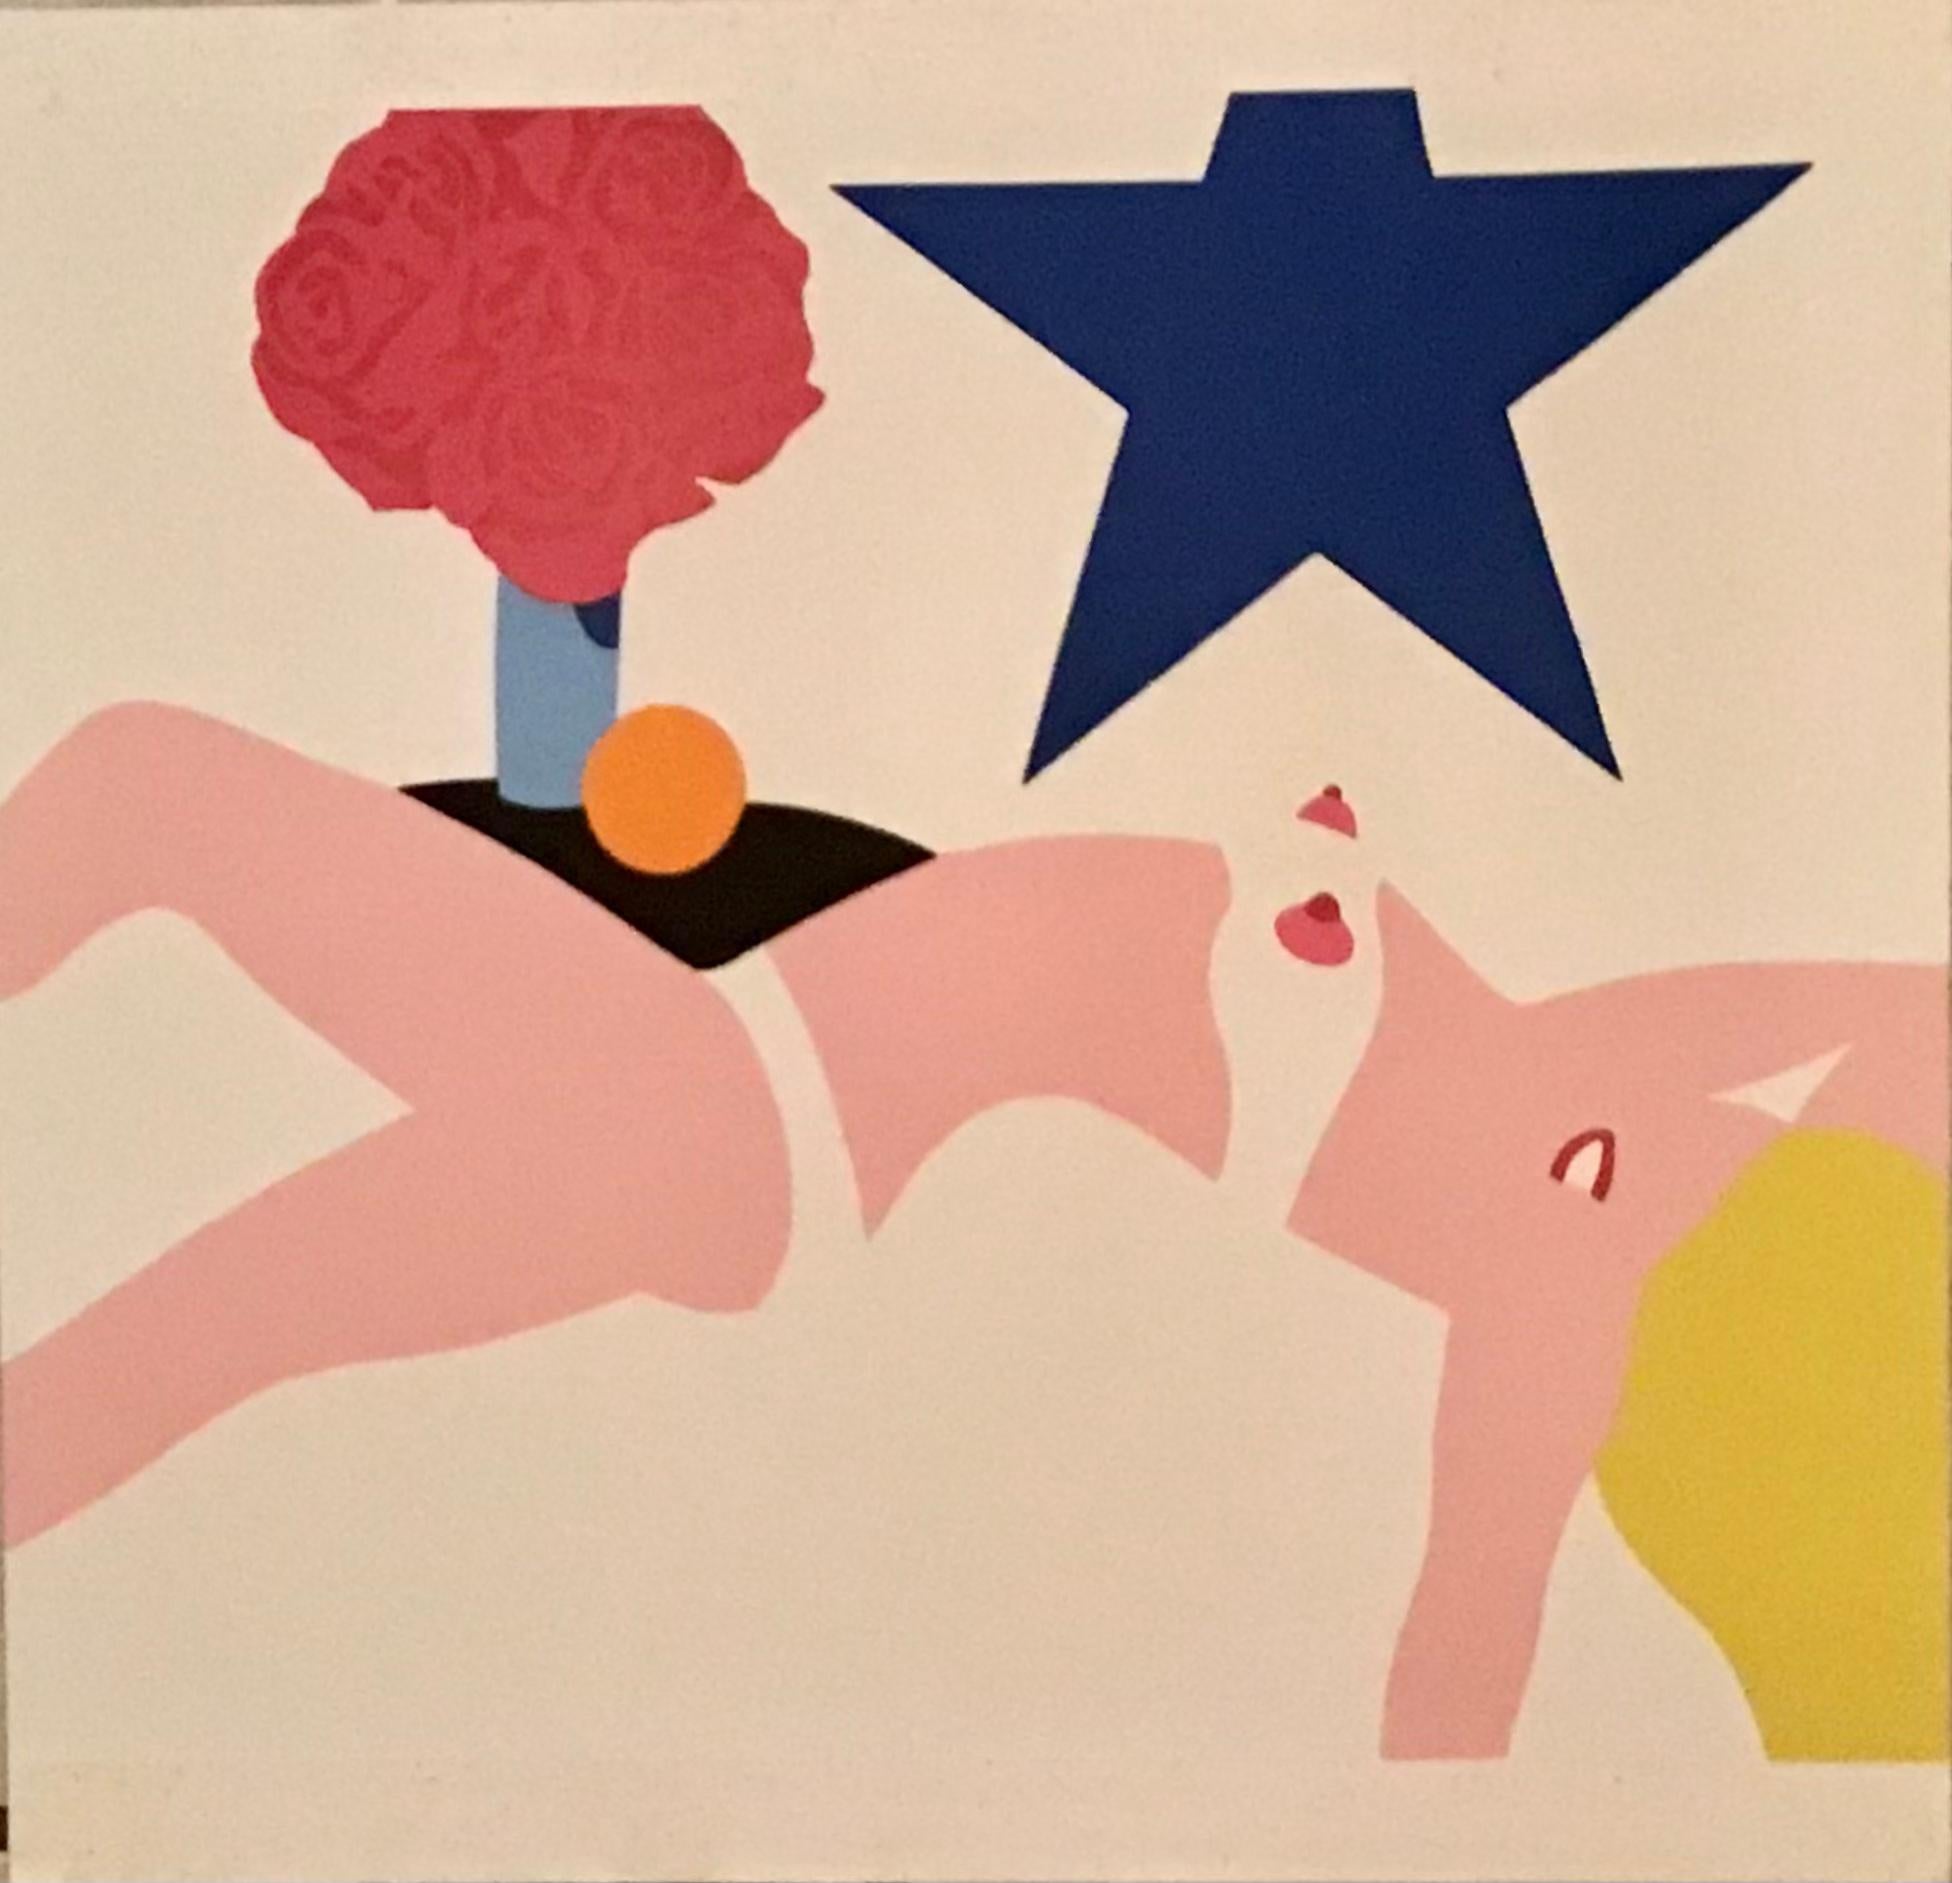 Tom Wesselmann 1931–2004. Great American Nude for Banner.
Circa 1968 screenprint in colors. This work is from the limited edition published by Multiples, Inc., New York. Not framed. 

